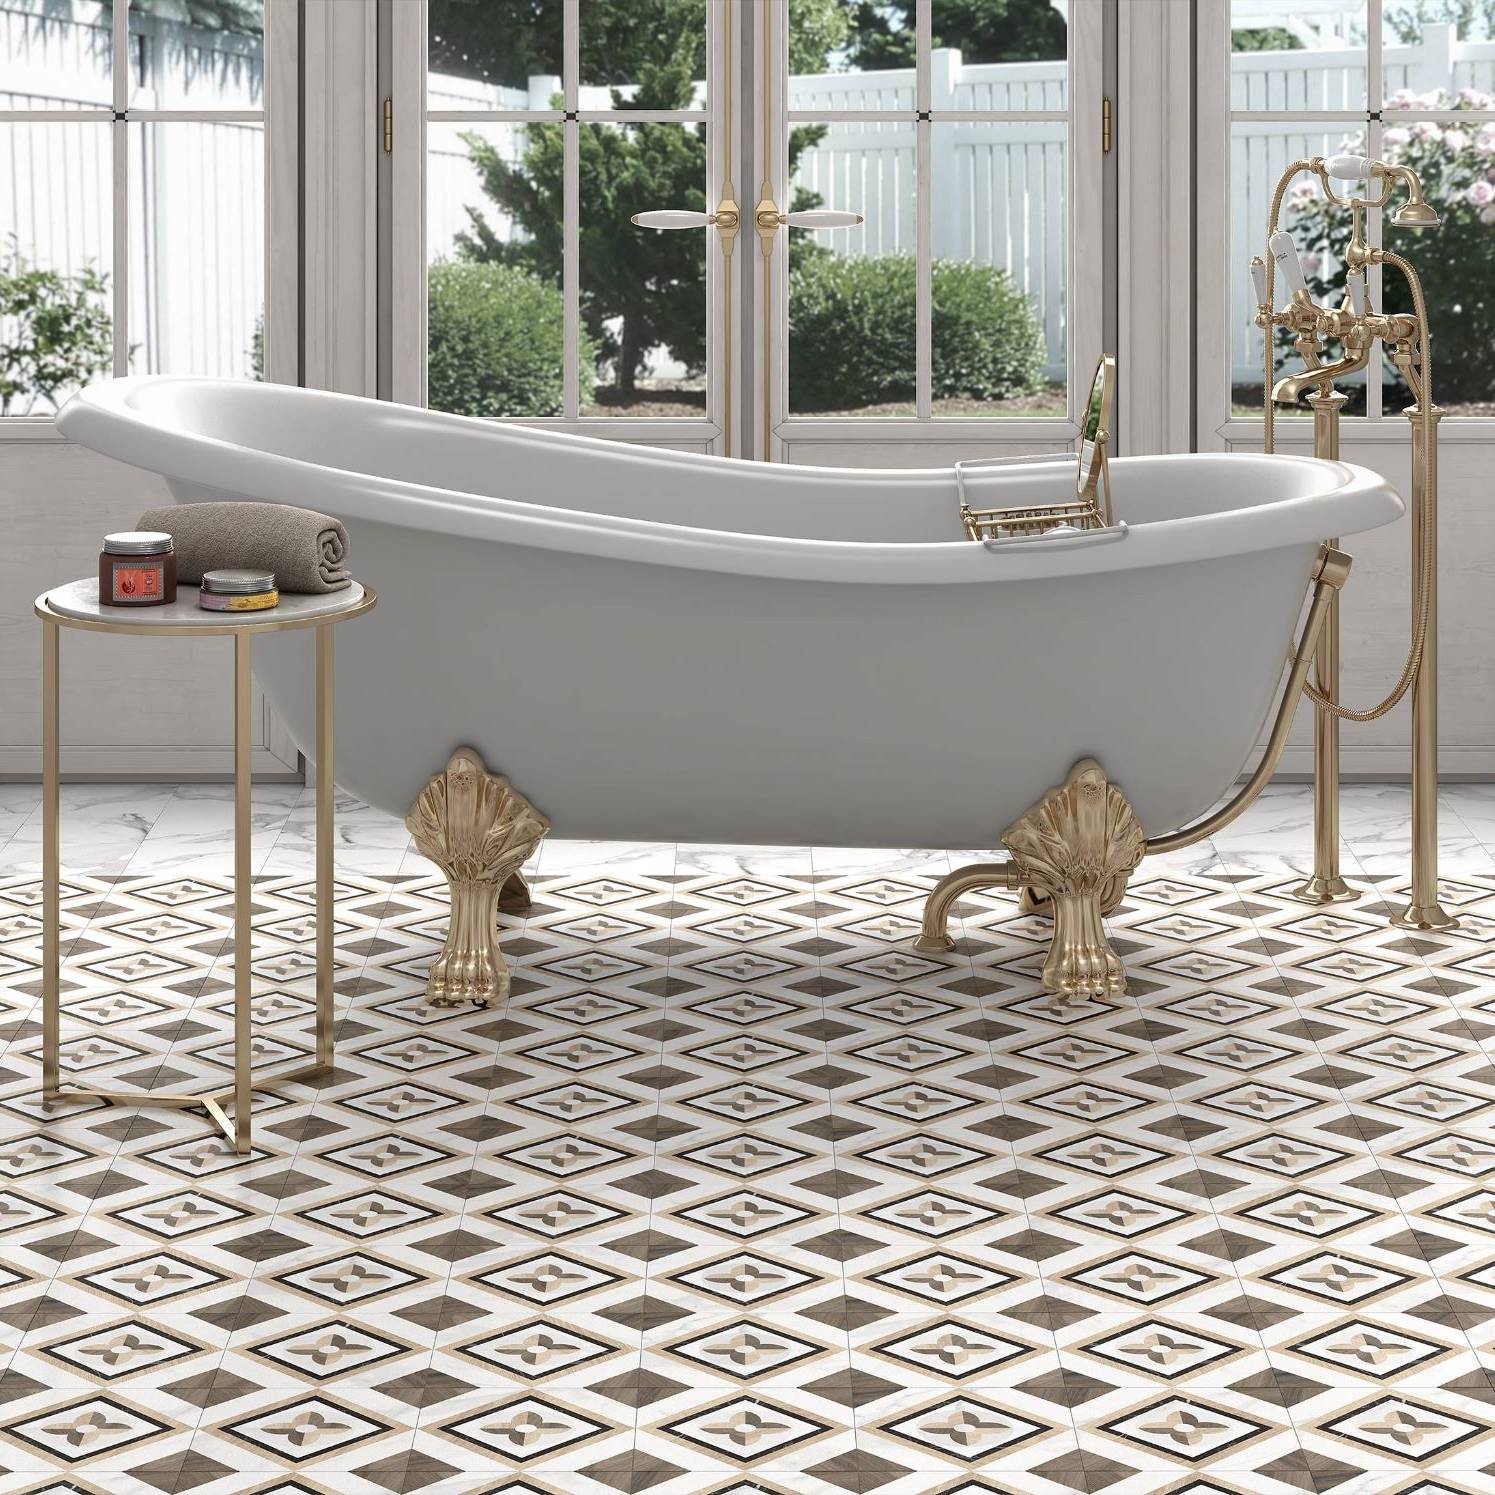 Cuban_Heritage_18_G | Stones & More | Finest selection of Mosaics, Glass, Tile and Stone